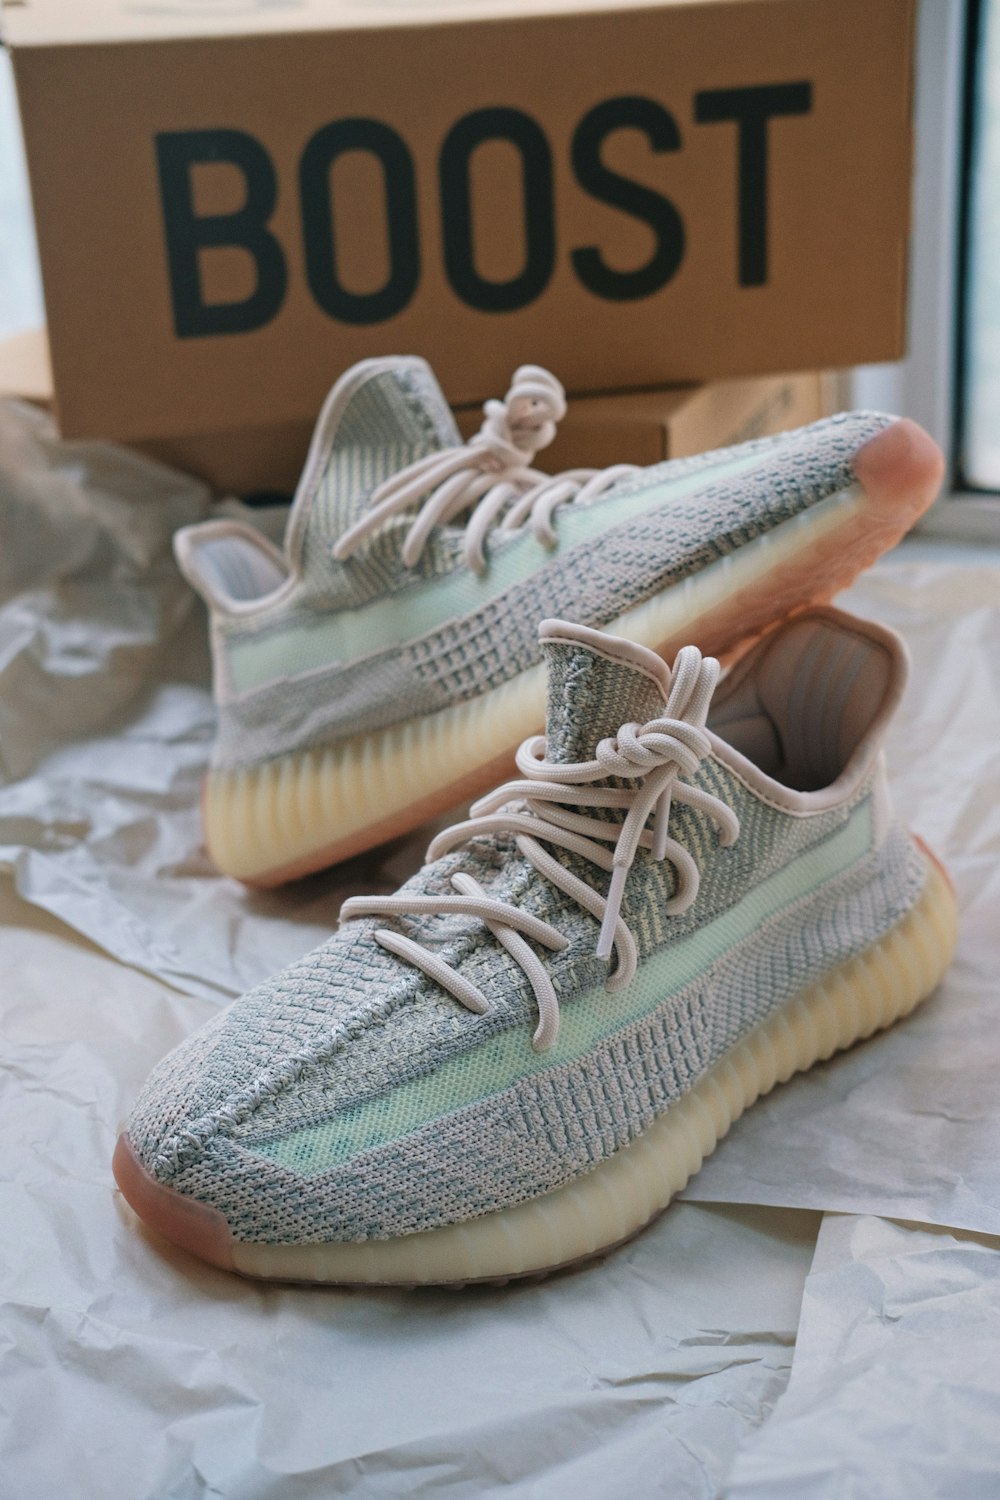 Gray adidas Yeezy Boost 350 shoes with box photo – Free Apparel Image on  Unsplash